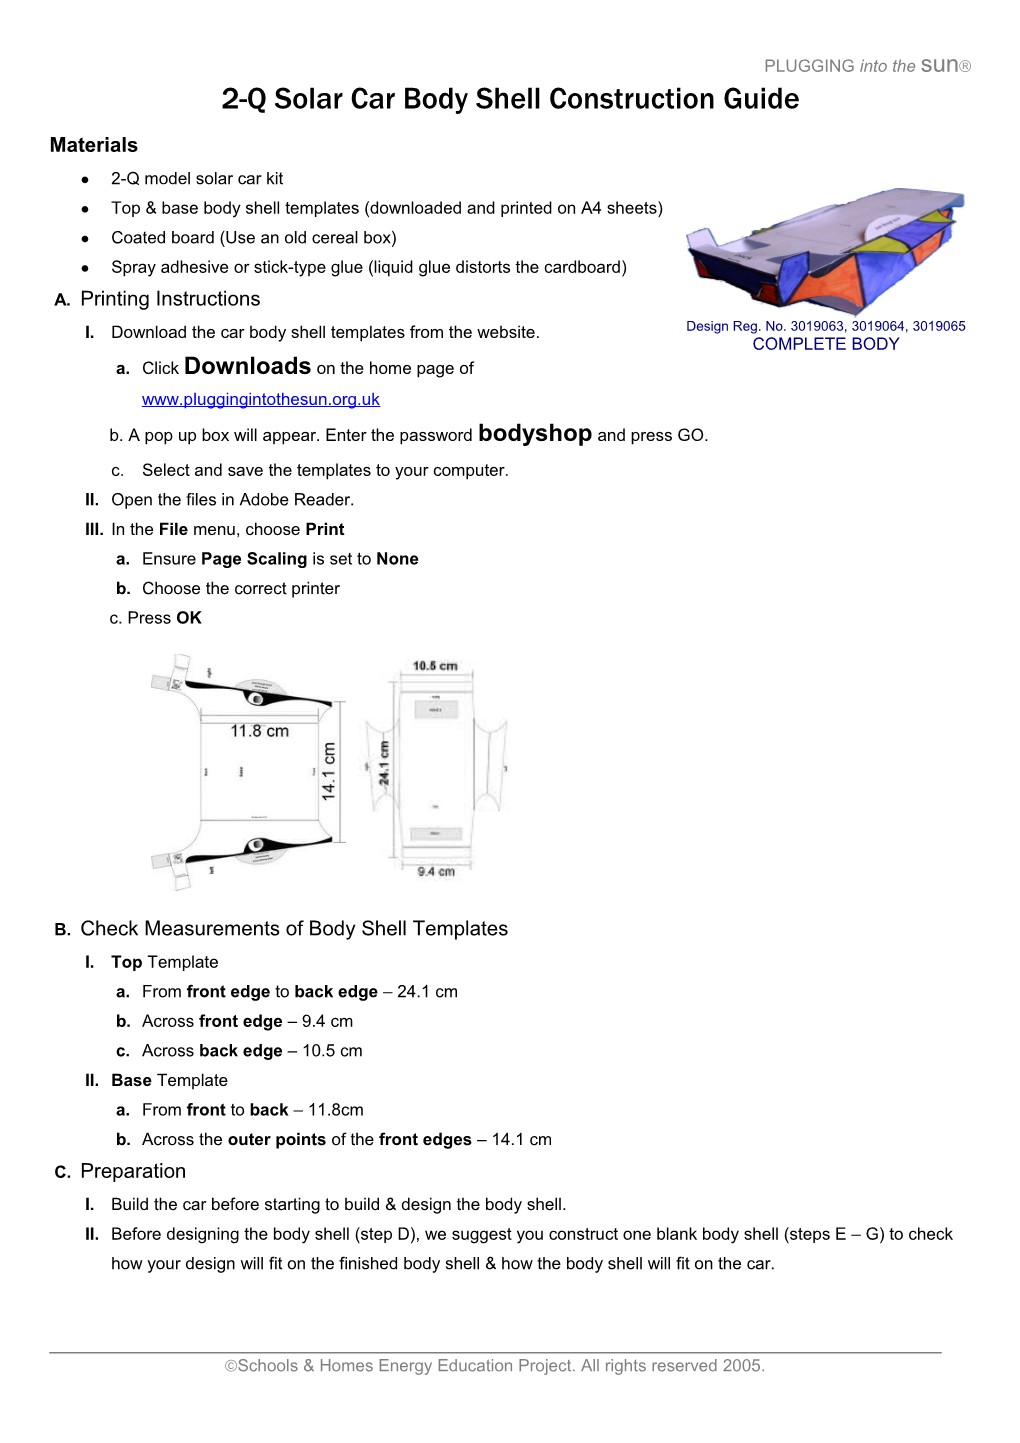 Construction Guide for the Plugging Into the Sun Solar Electri